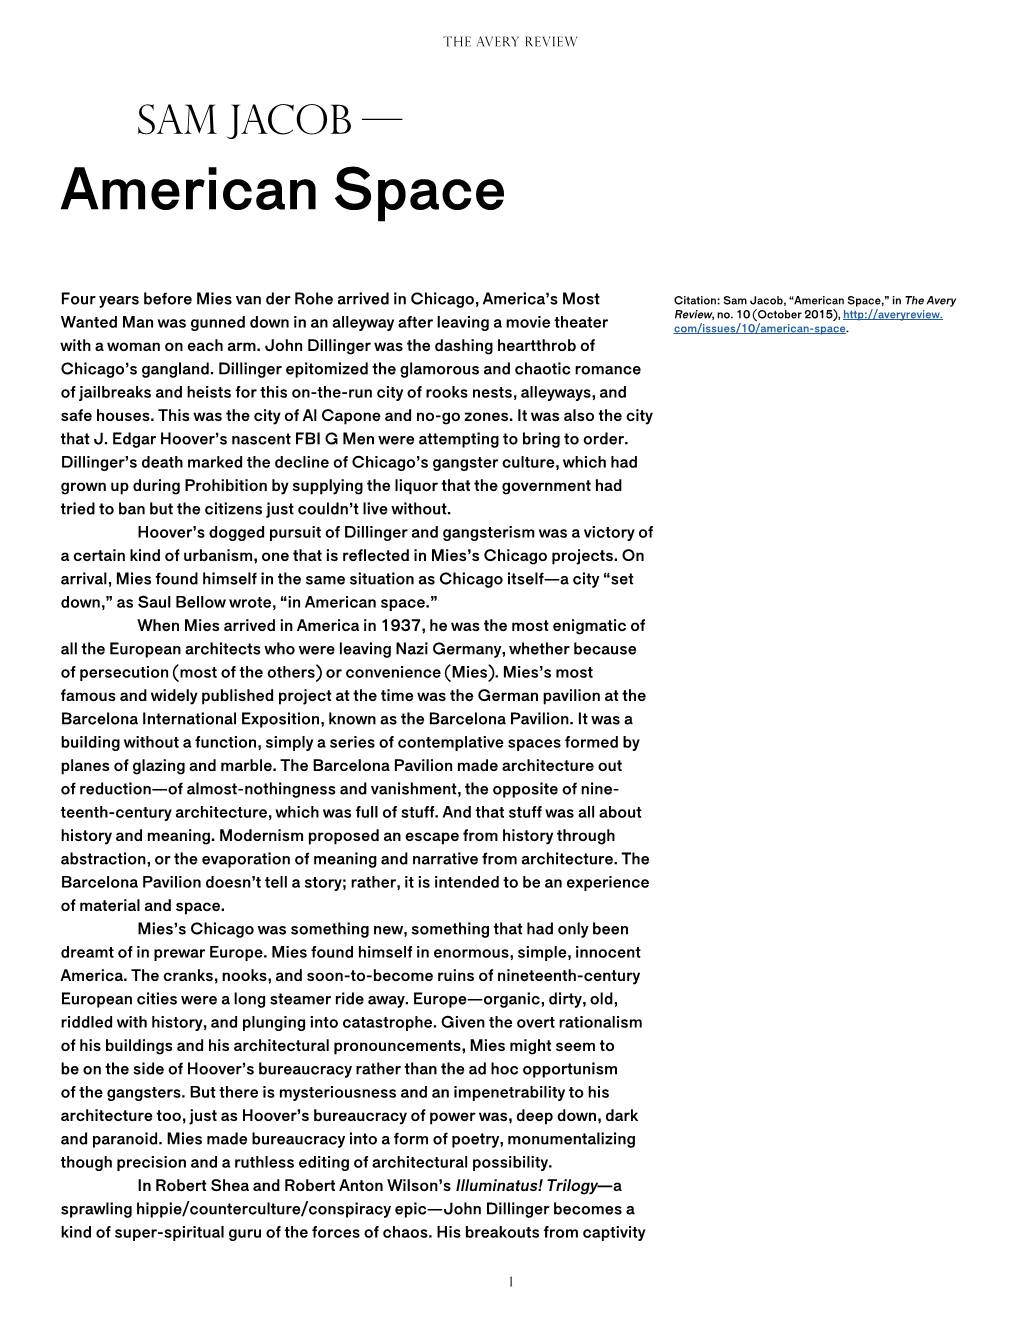 American Space